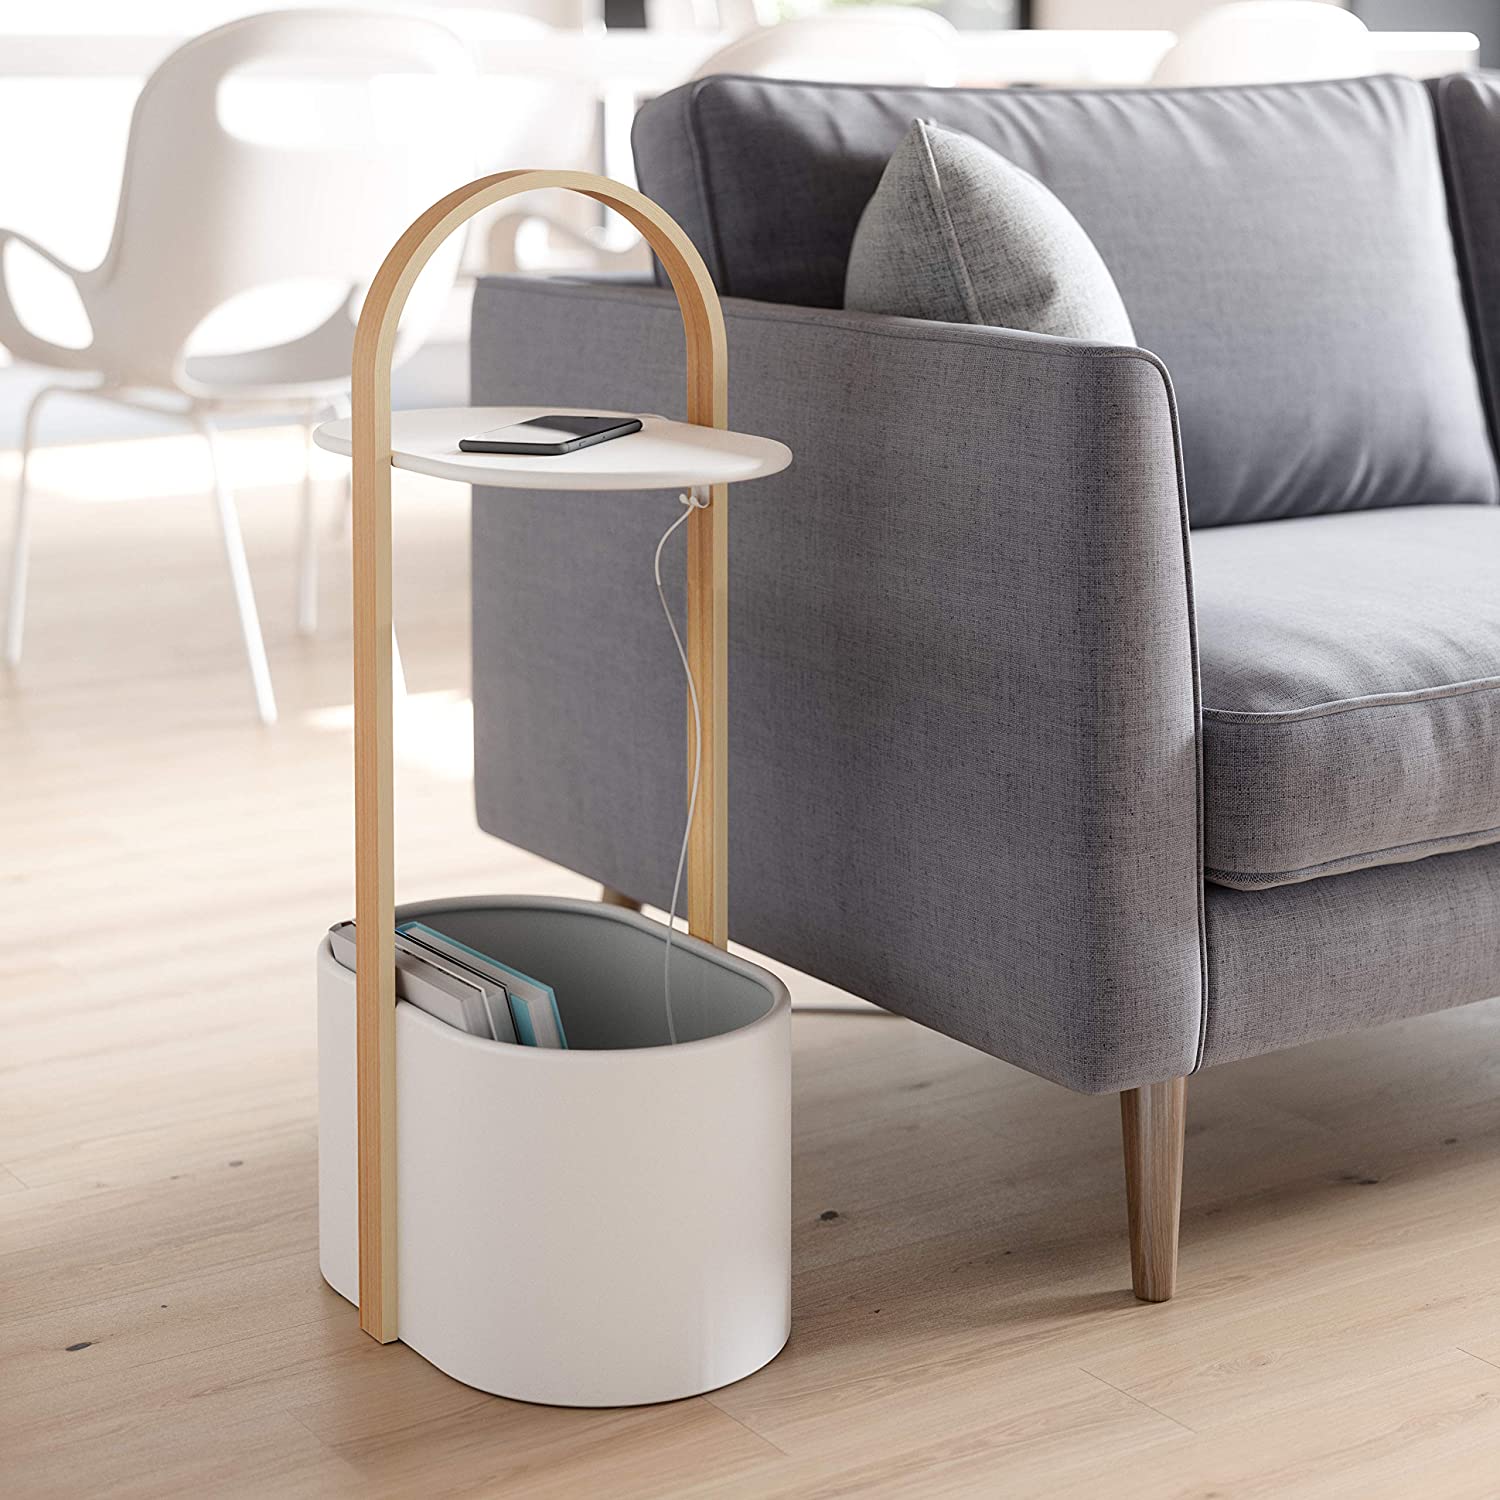 51 Side Tables With Storage For Smart, White End Tables With Built In Lamps